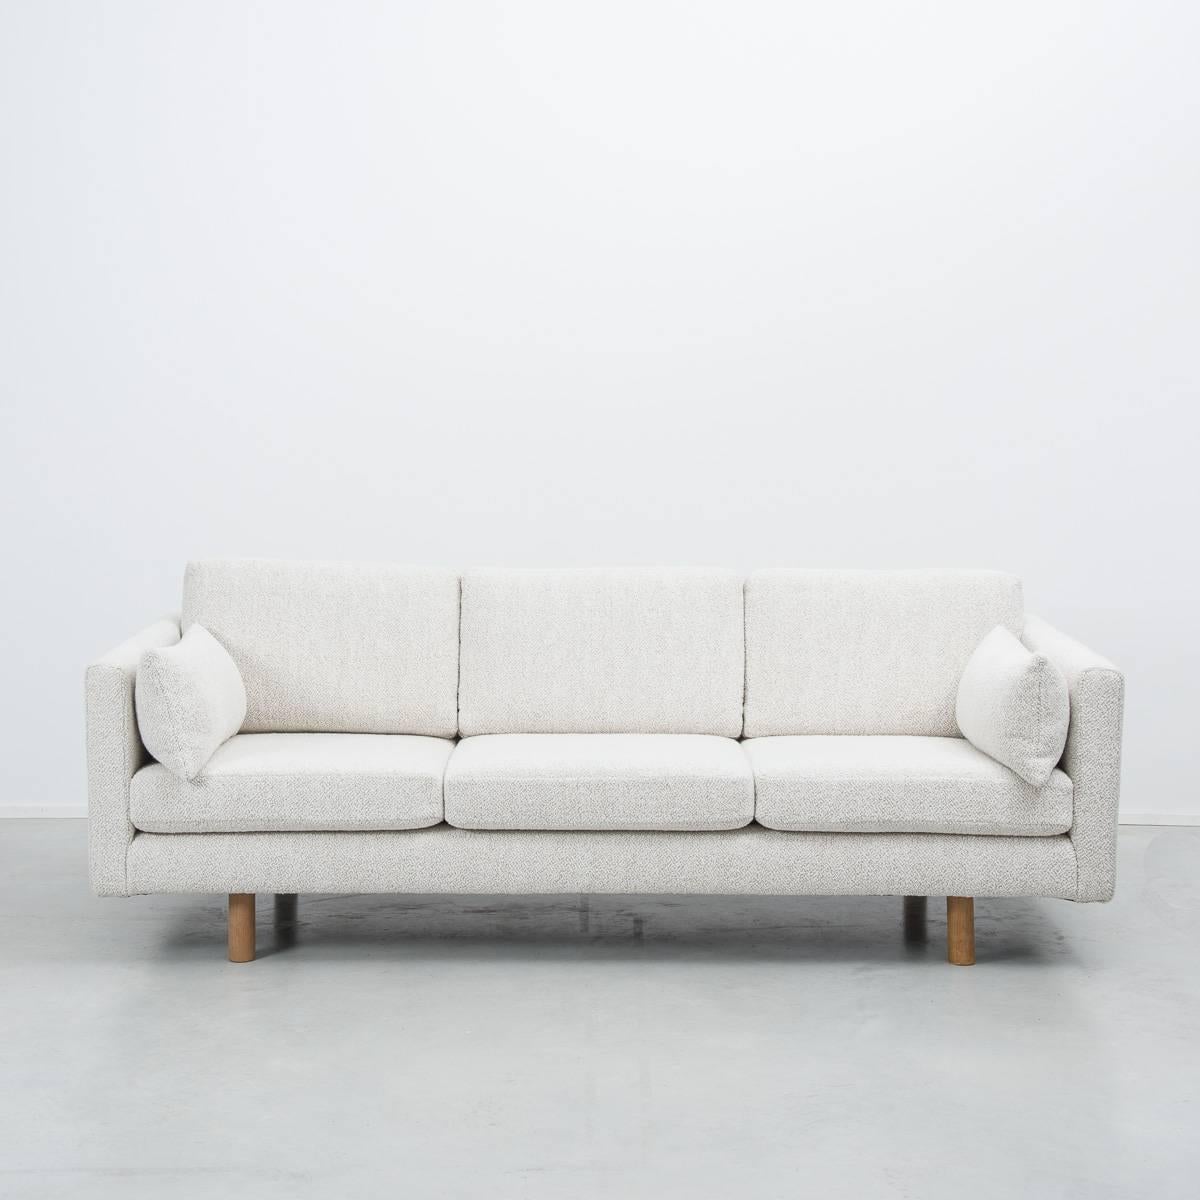 This three-seat sofa was designed by Erik Jørgensen (1928-1998) and produced by his own manufacturing company in the 1970s, Svendborg, Denmark. The ‘EJ 220/3’ is distinguished through it’s low boxy frame, narrow armrests and casual appearance.